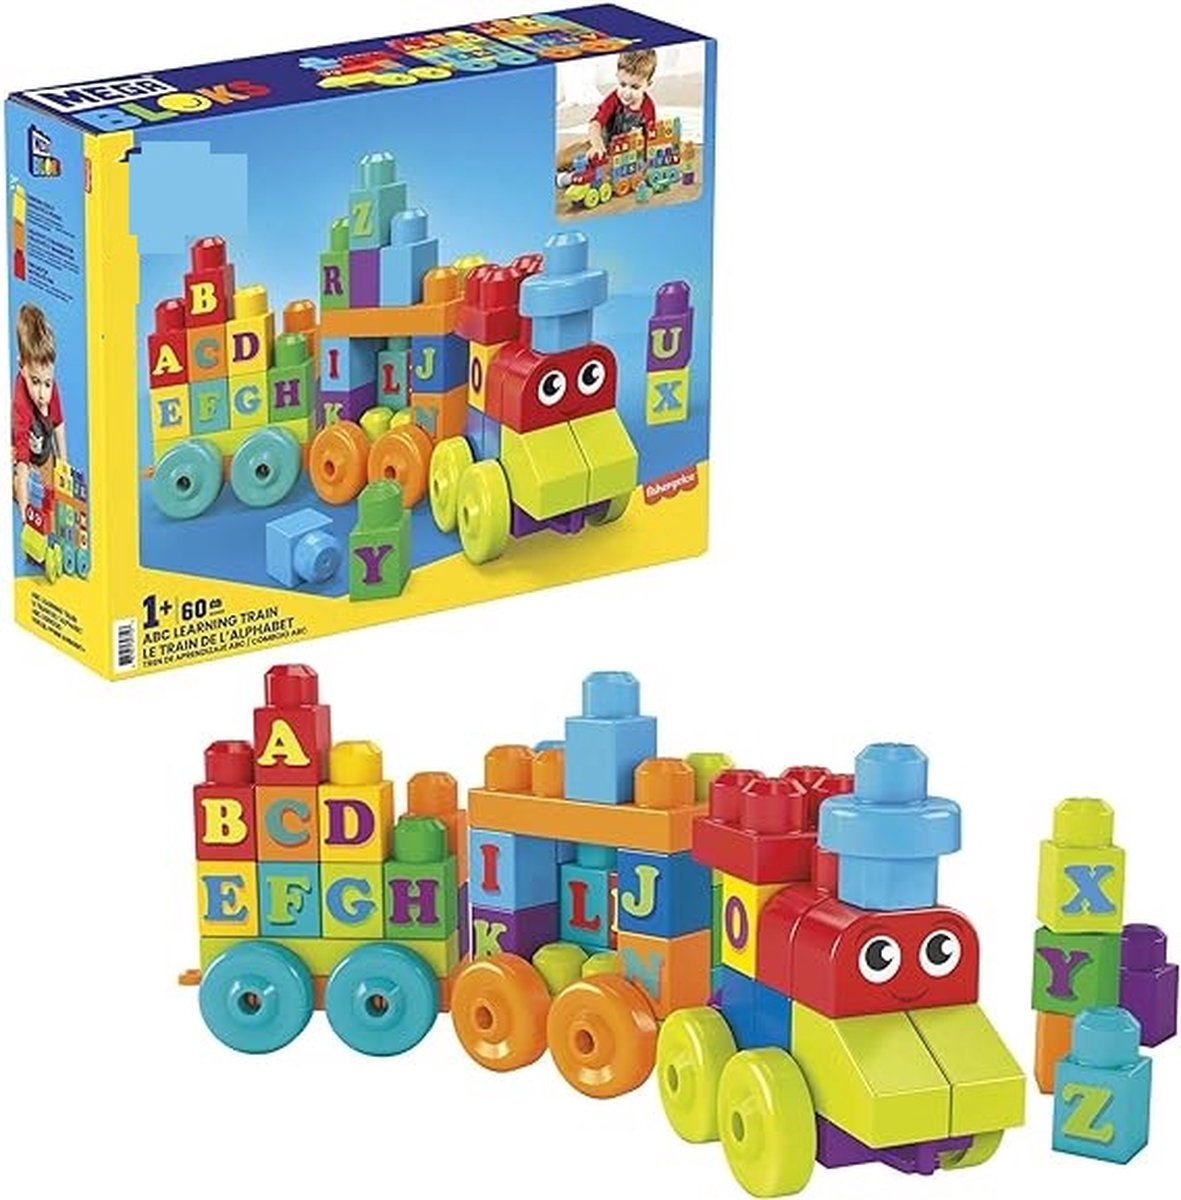 Berkatmarkt - Fisher Price Building Toy Abc Blocks, Abc Learning Train Learning Toy For Toddlers 1-3